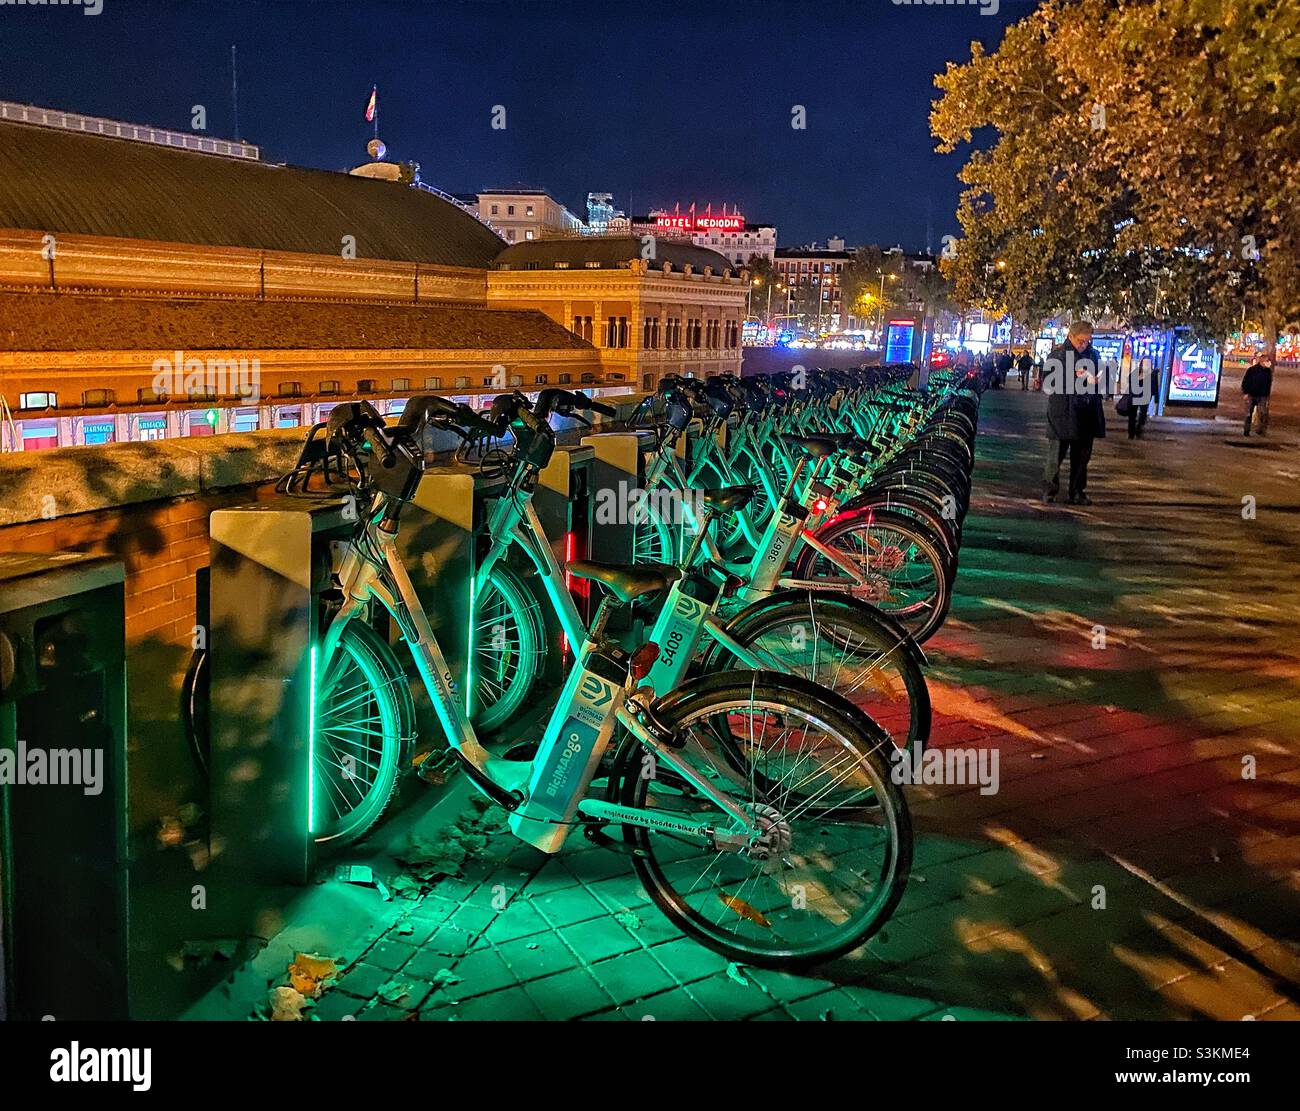 Electric bikes lined up for rental outside Atocha railway station in Madrid one evening after nightfall in autumn. The bikes are illuminated for the purposes of visibility and safety. Stock Photo